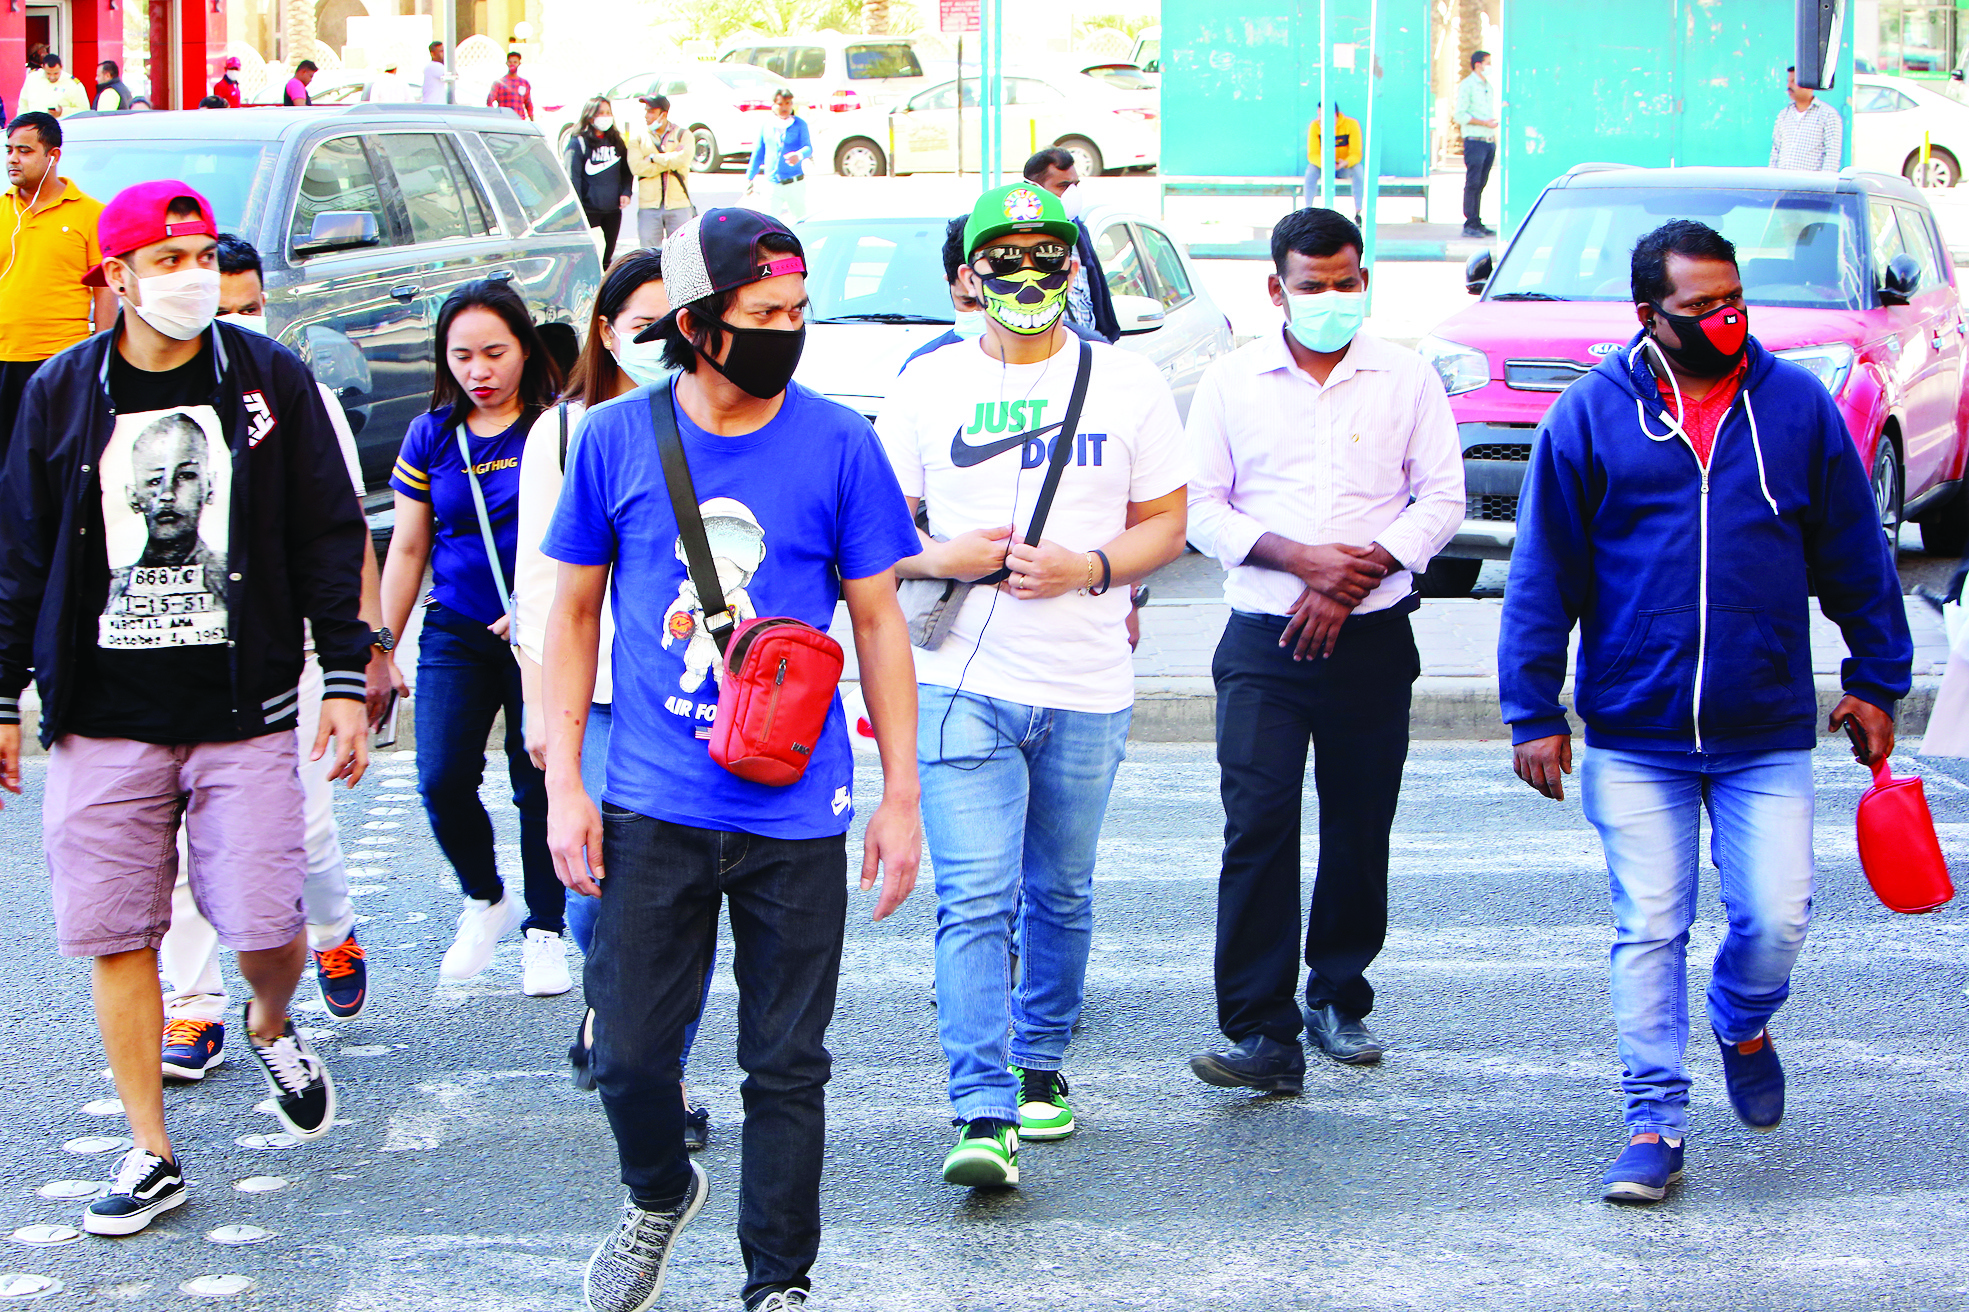 People wearing protective masks cross the street in Kuwait City on March 2, 2020, amid a global outbreak of the novel Coronavirus. (Photo by YASSER AL-ZAYYAT / AFP)